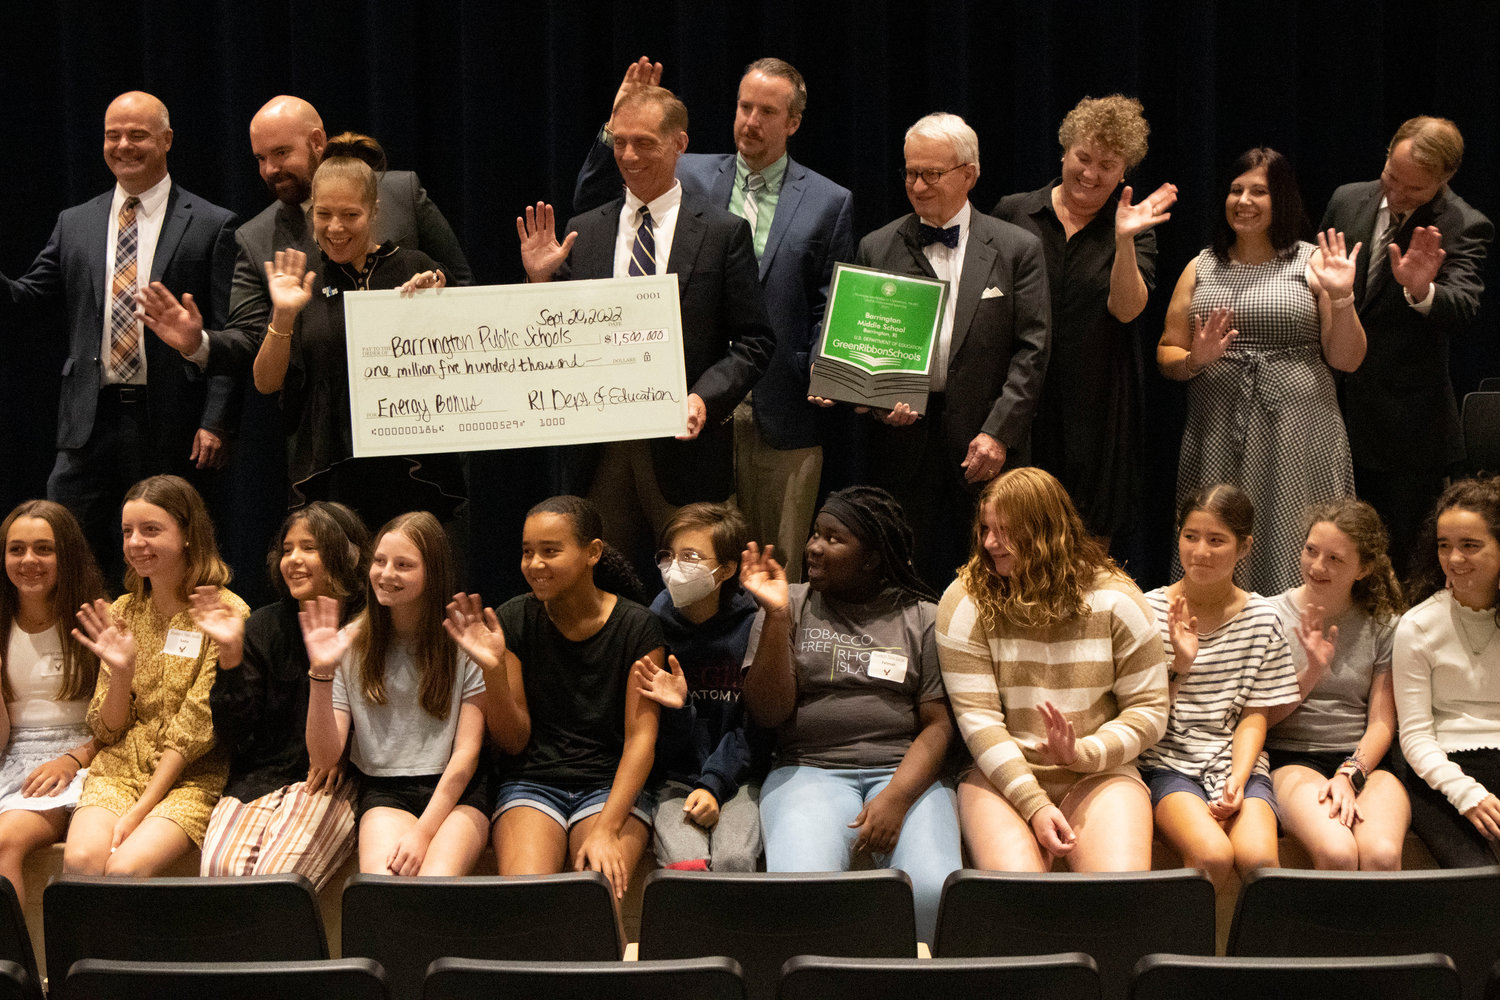 A group of Barrington school officials and middle school students celebrate the Green Ribbon Award won by Barrington Middle School. Holding the check for a $1.5 million energy bonus are RI Commissioner of Education Angélica Infante-Green (left) and Barrington Superintendent of Schools Michael Messore.